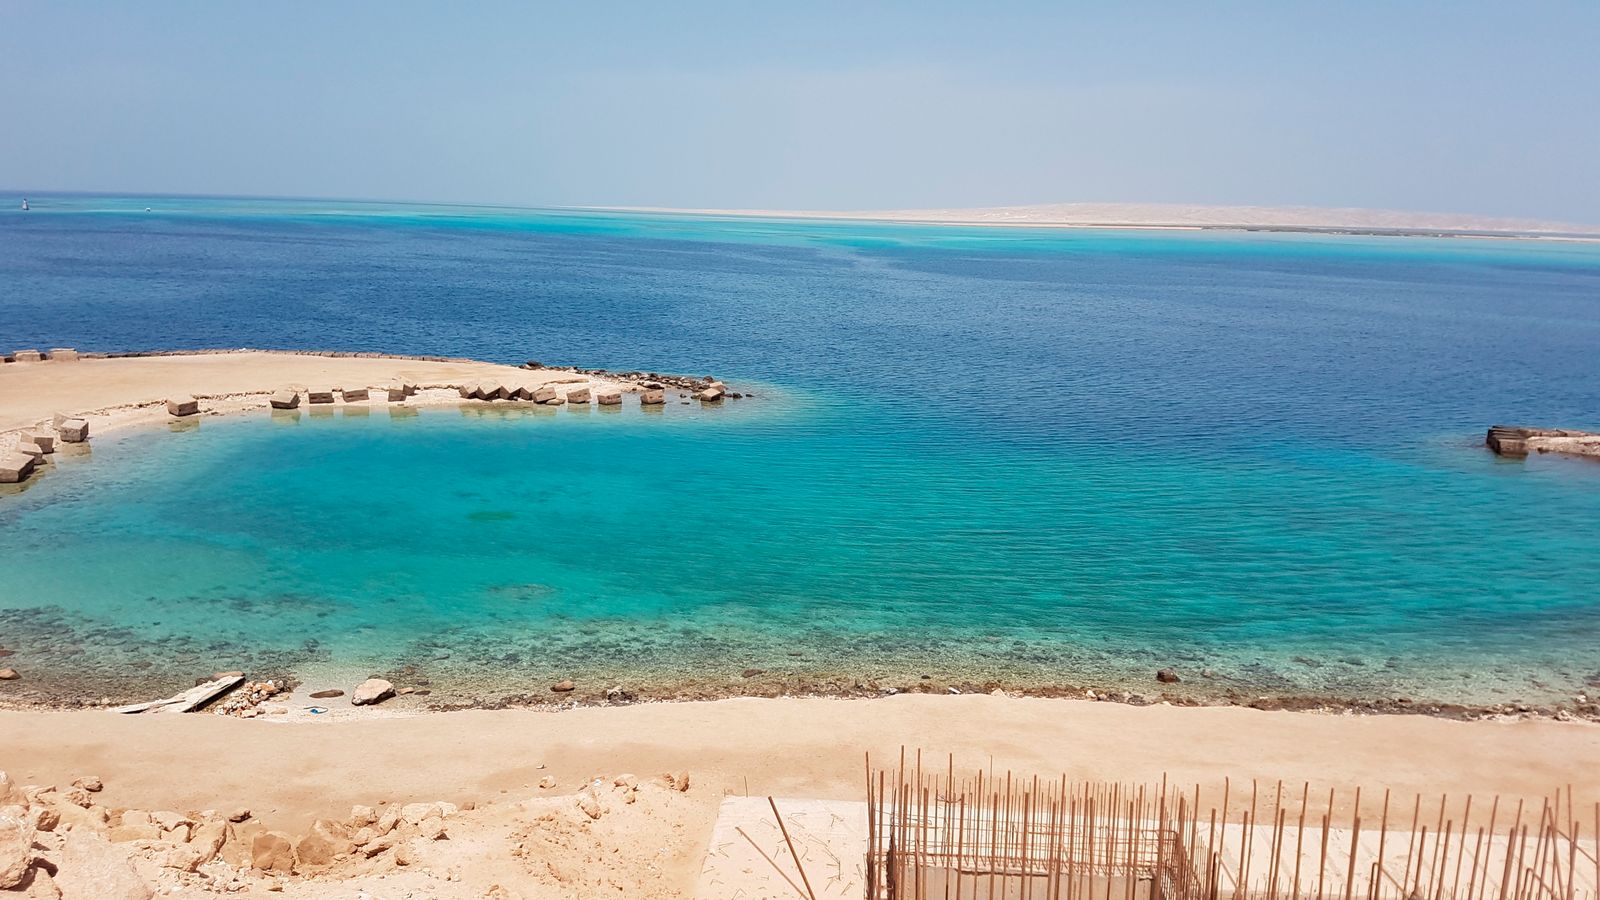 Part of Egypt’s Red Sea coast closed after woman killed in shark attack